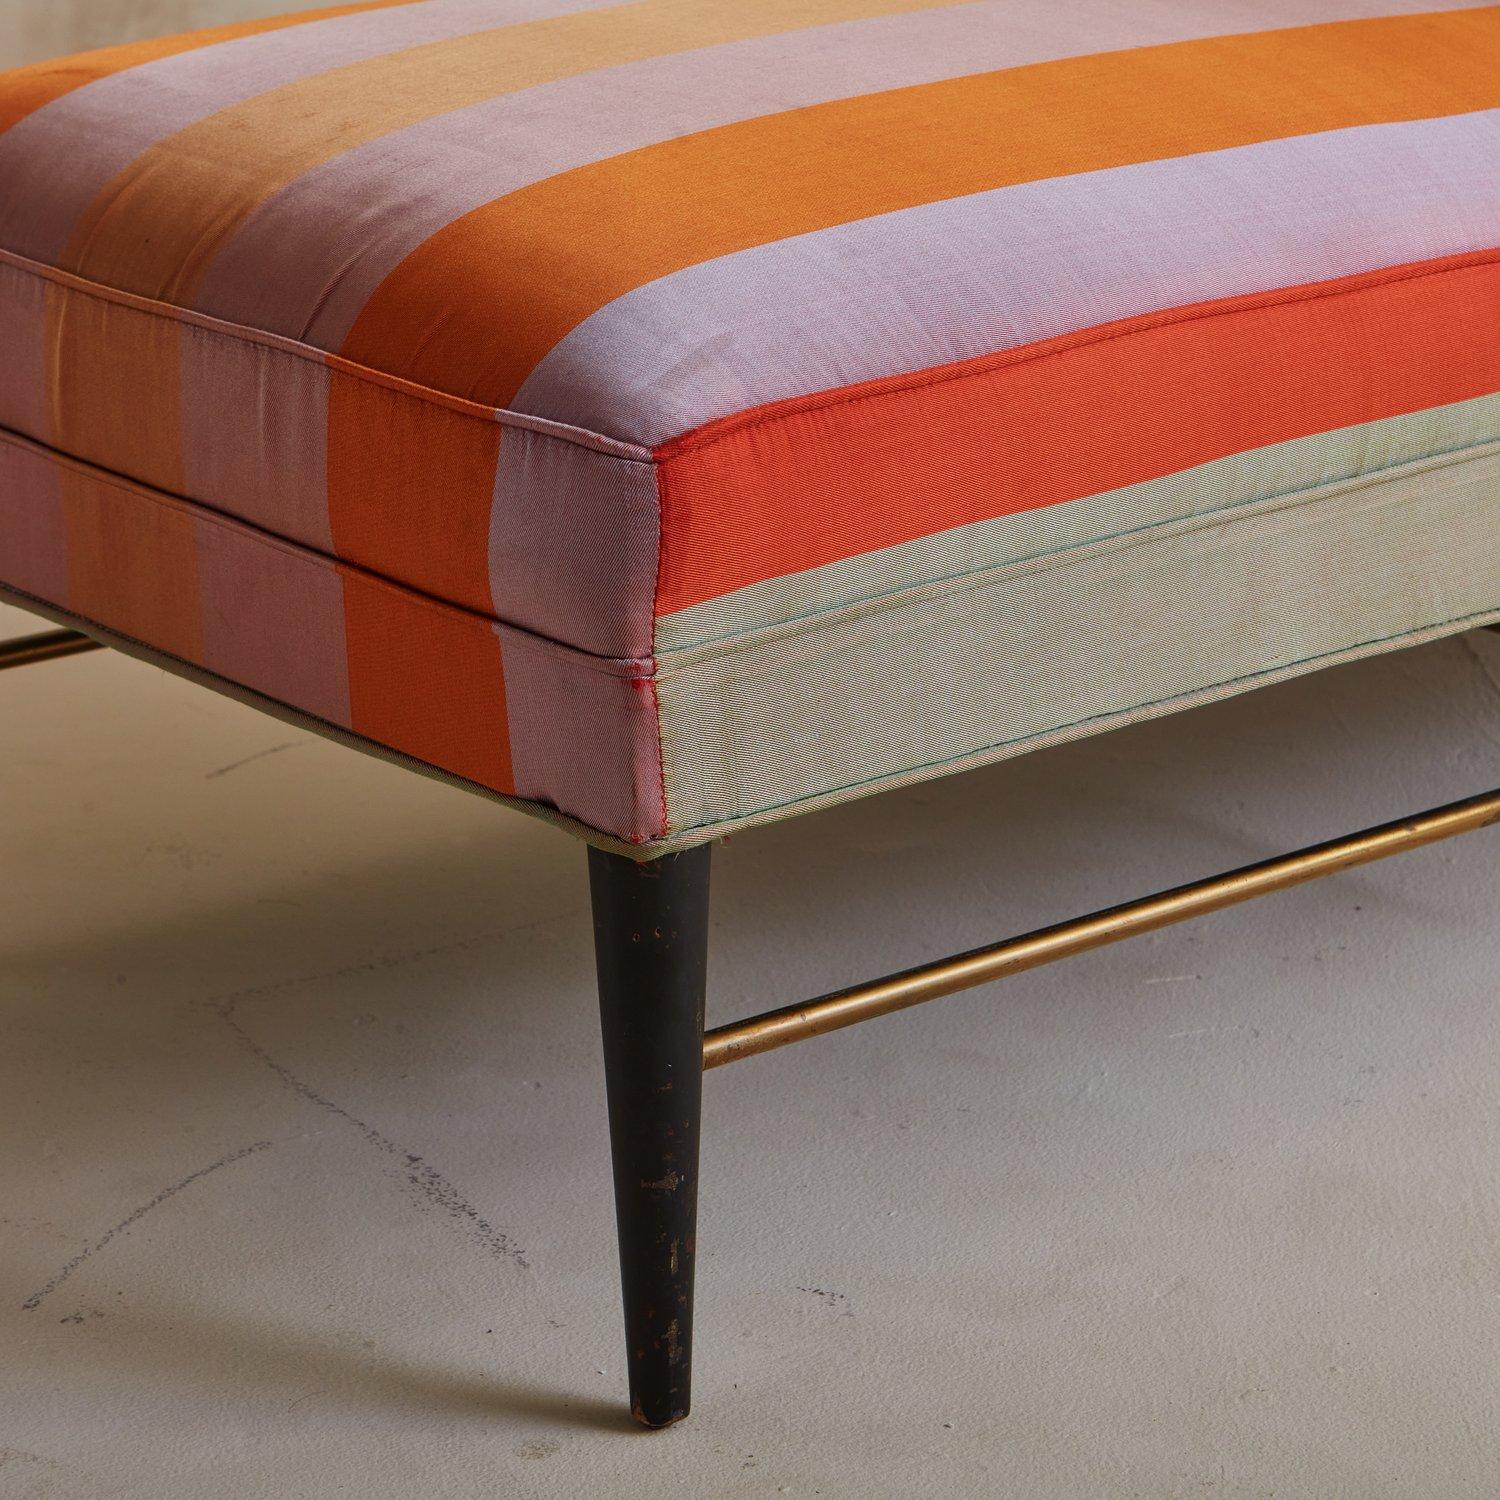 Chaise Lounge in Striped Silk by Paul McCobb for Directional, USA 1950s For Sale 5